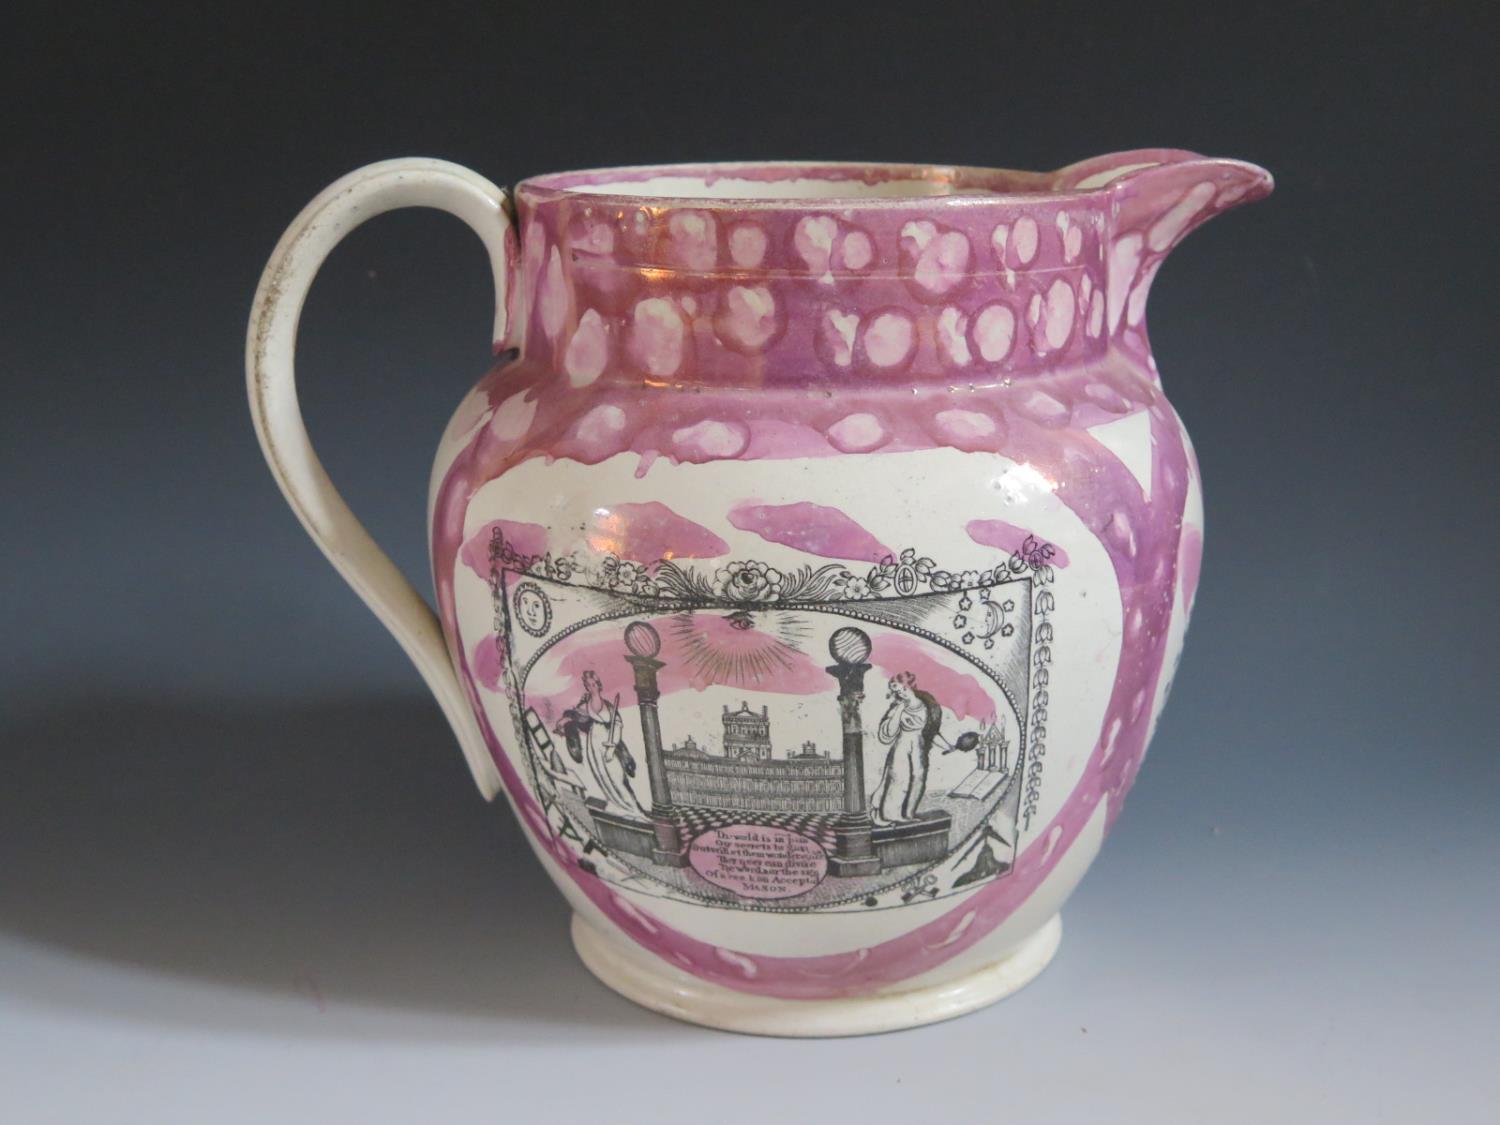 A Sunderland Lustre Jug decorated with monochrome transfers including Masonic scene with poetic